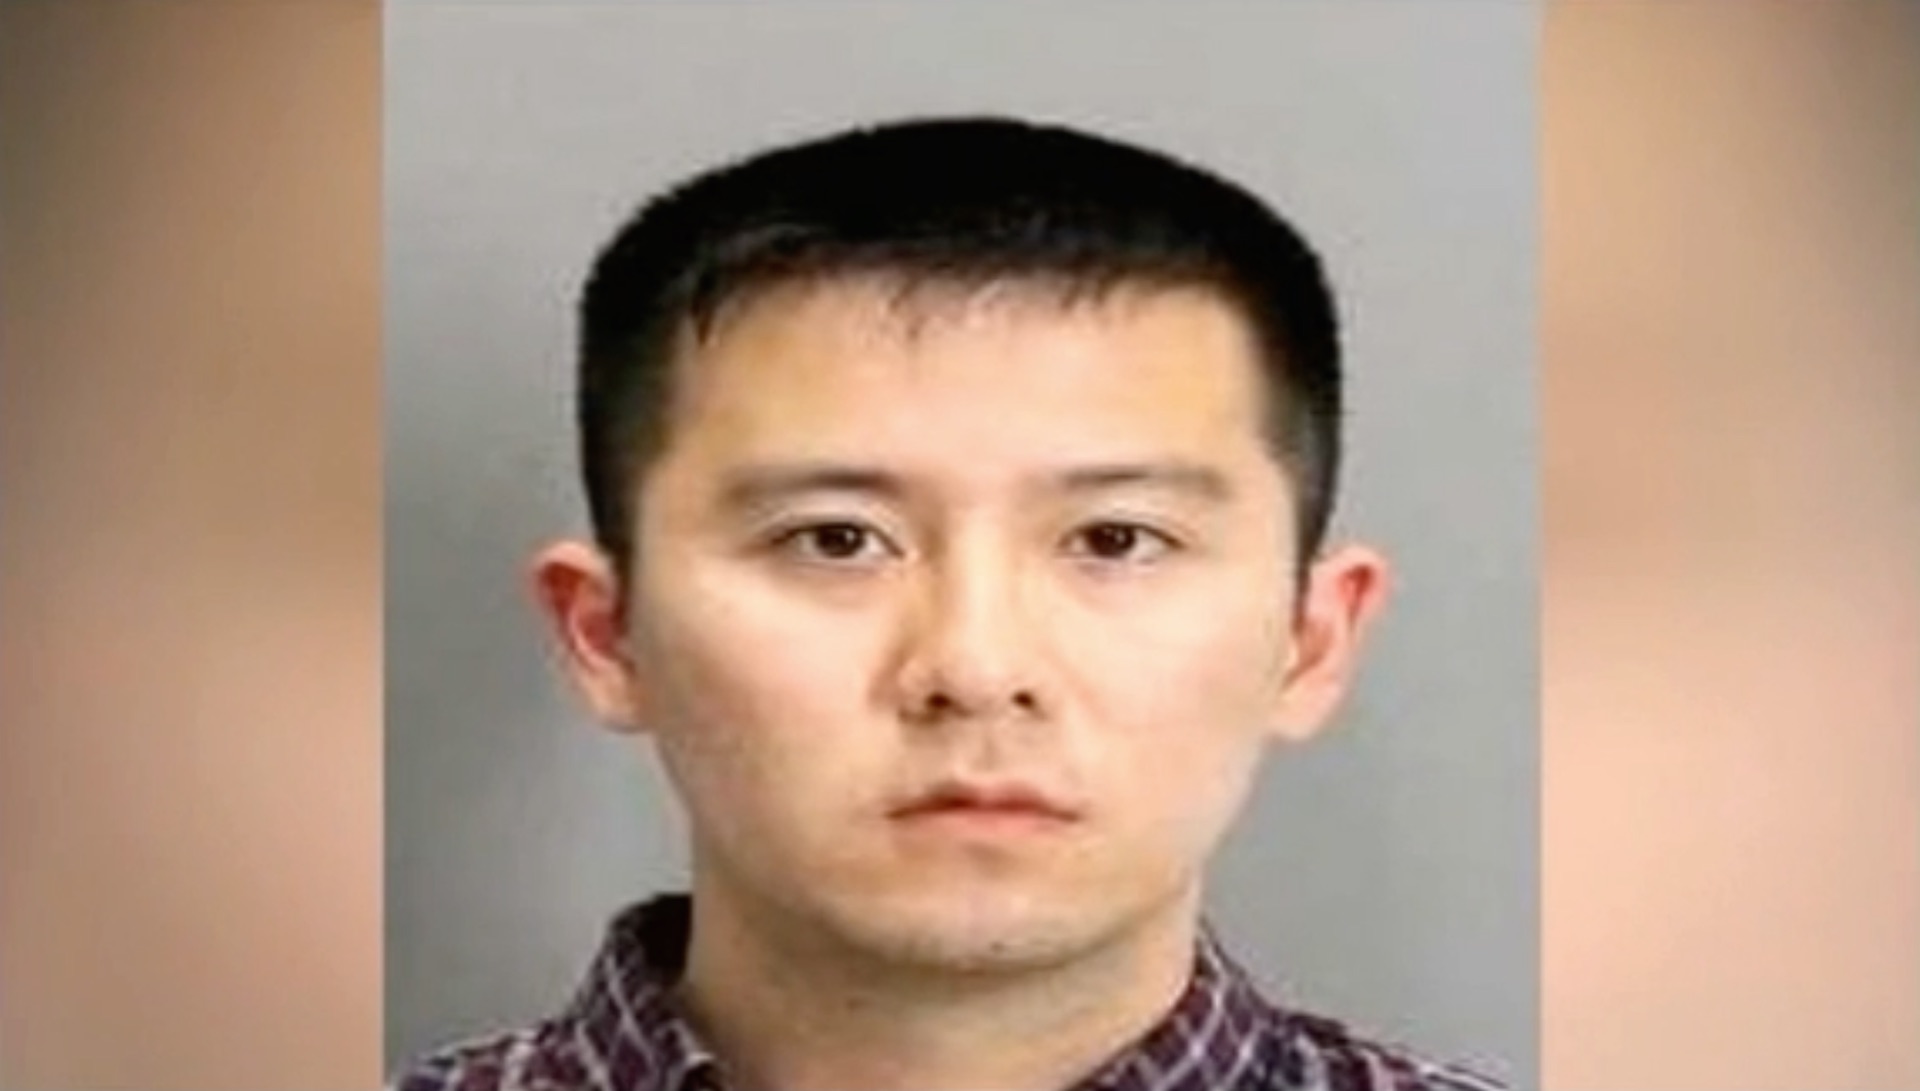 Teacher Student Xxx Com - At school, he was the 'cool' teacher. Online, police say, he was a student-seducing  porn star. - The Washington Post